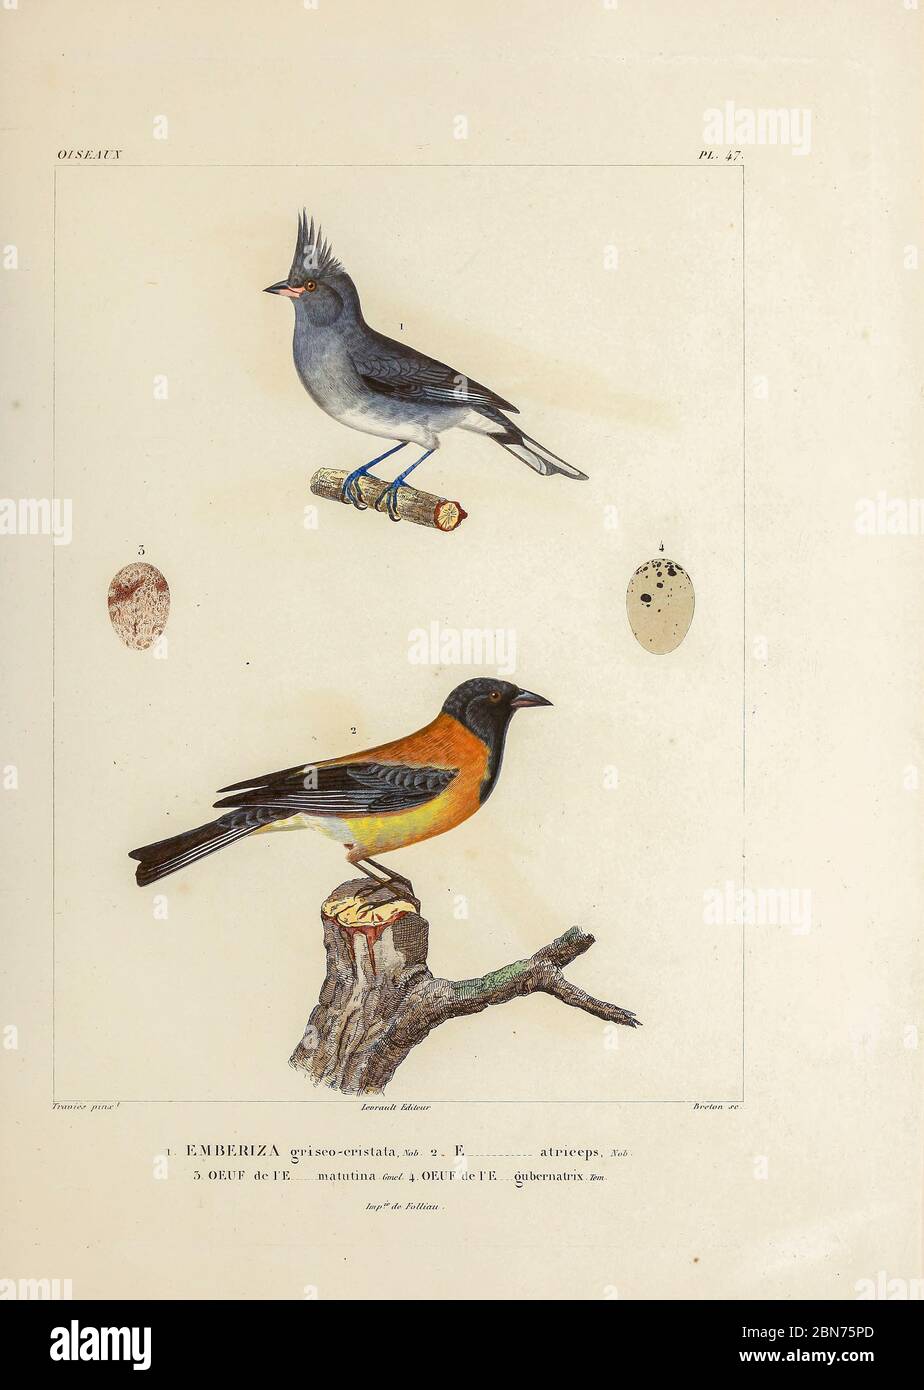 hand coloured sketch Top: grey-crested finch (Lophospingus griseocristatus [Here as Emberiza griseo-cristat]) Bottom: black-hooded sierra finch (Phrygilus atriceps [Here as Emberiza atriceps]) From the book 'Voyage dans l'Amérique Méridionale' [Journey to South America: (Brazil, the eastern republic of Uruguay, the Argentine Republic, Patagonia, the republic of Chile, the republic of Bolivia, the republic of Peru), executed during the years 1826 - 1833] 4th volume Part 3 By: Orbigny, Alcide Dessalines d', d'Orbigny, 1802-1857; Montagne, Jean François Camille, 1784-1866; Martius, Karl Friedric Stock Photo